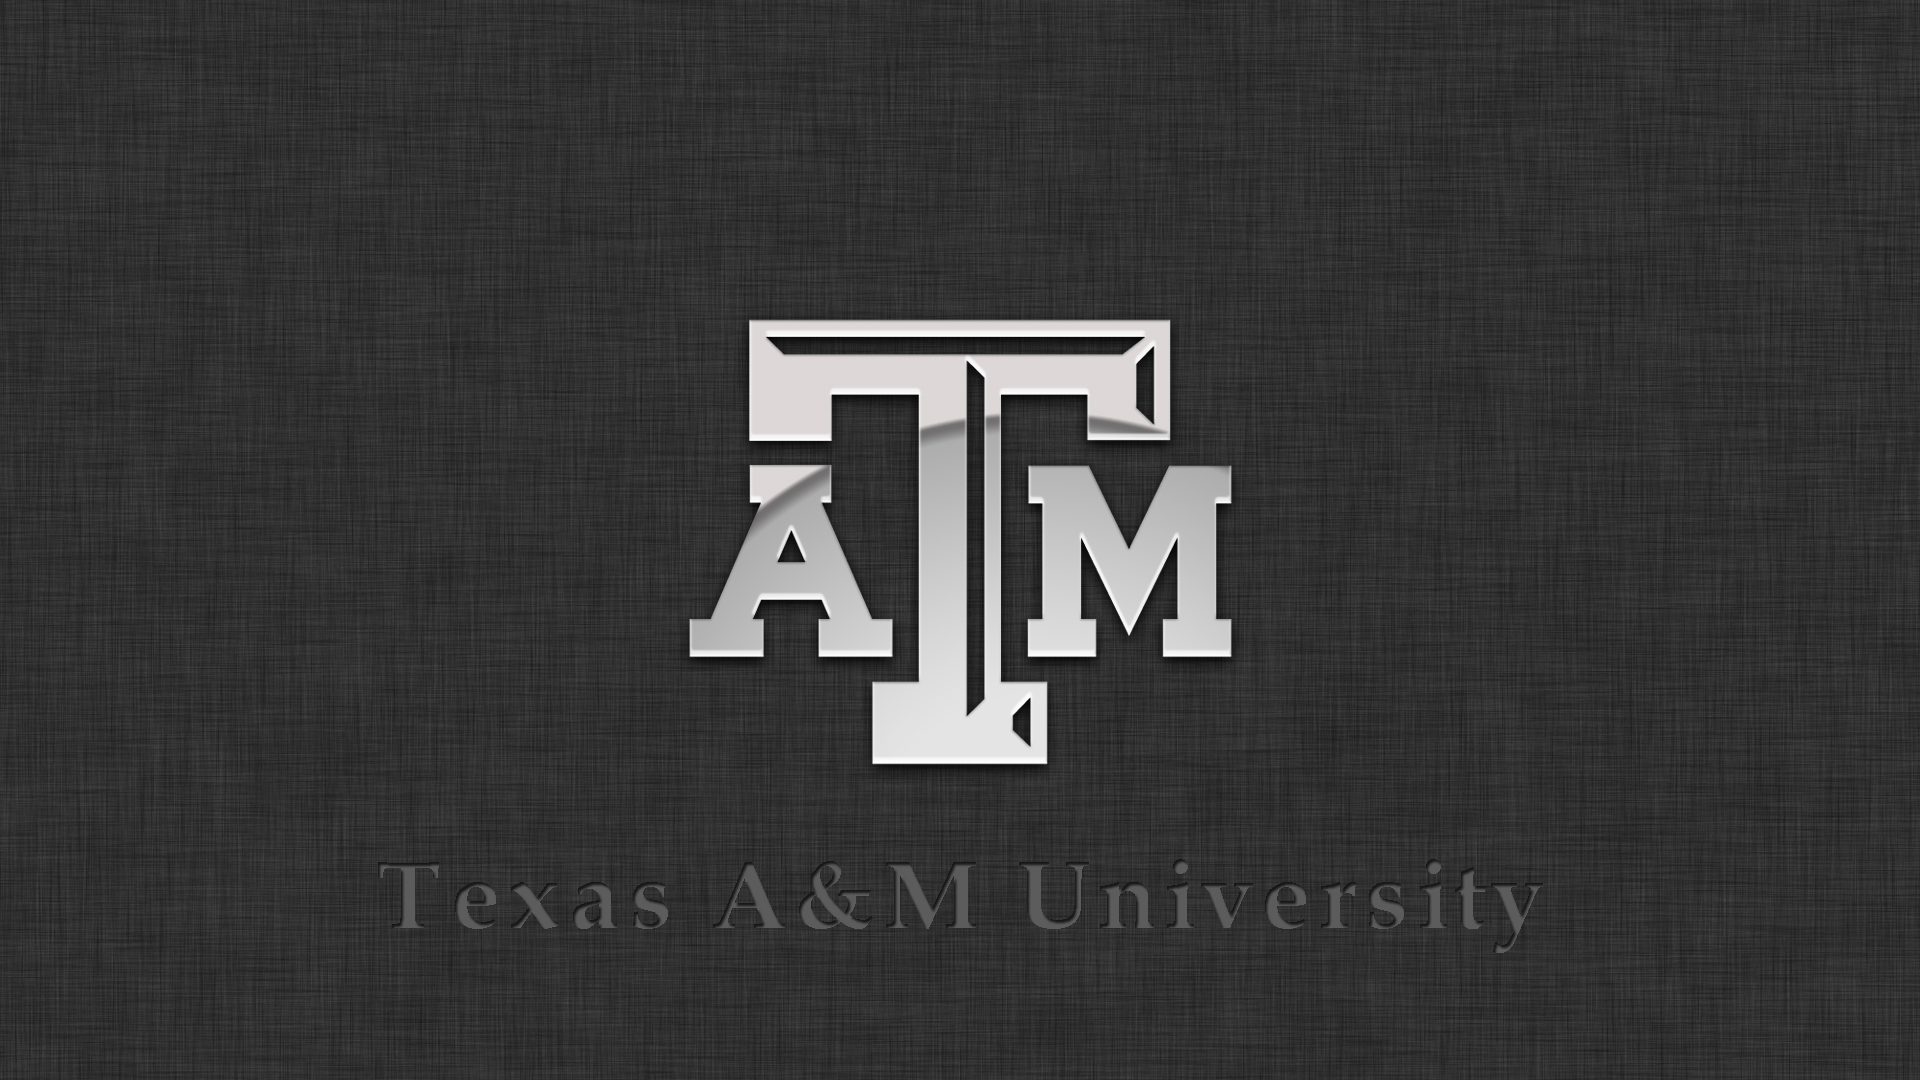 TAMU iOS Wallpaper by Chimmy92 on